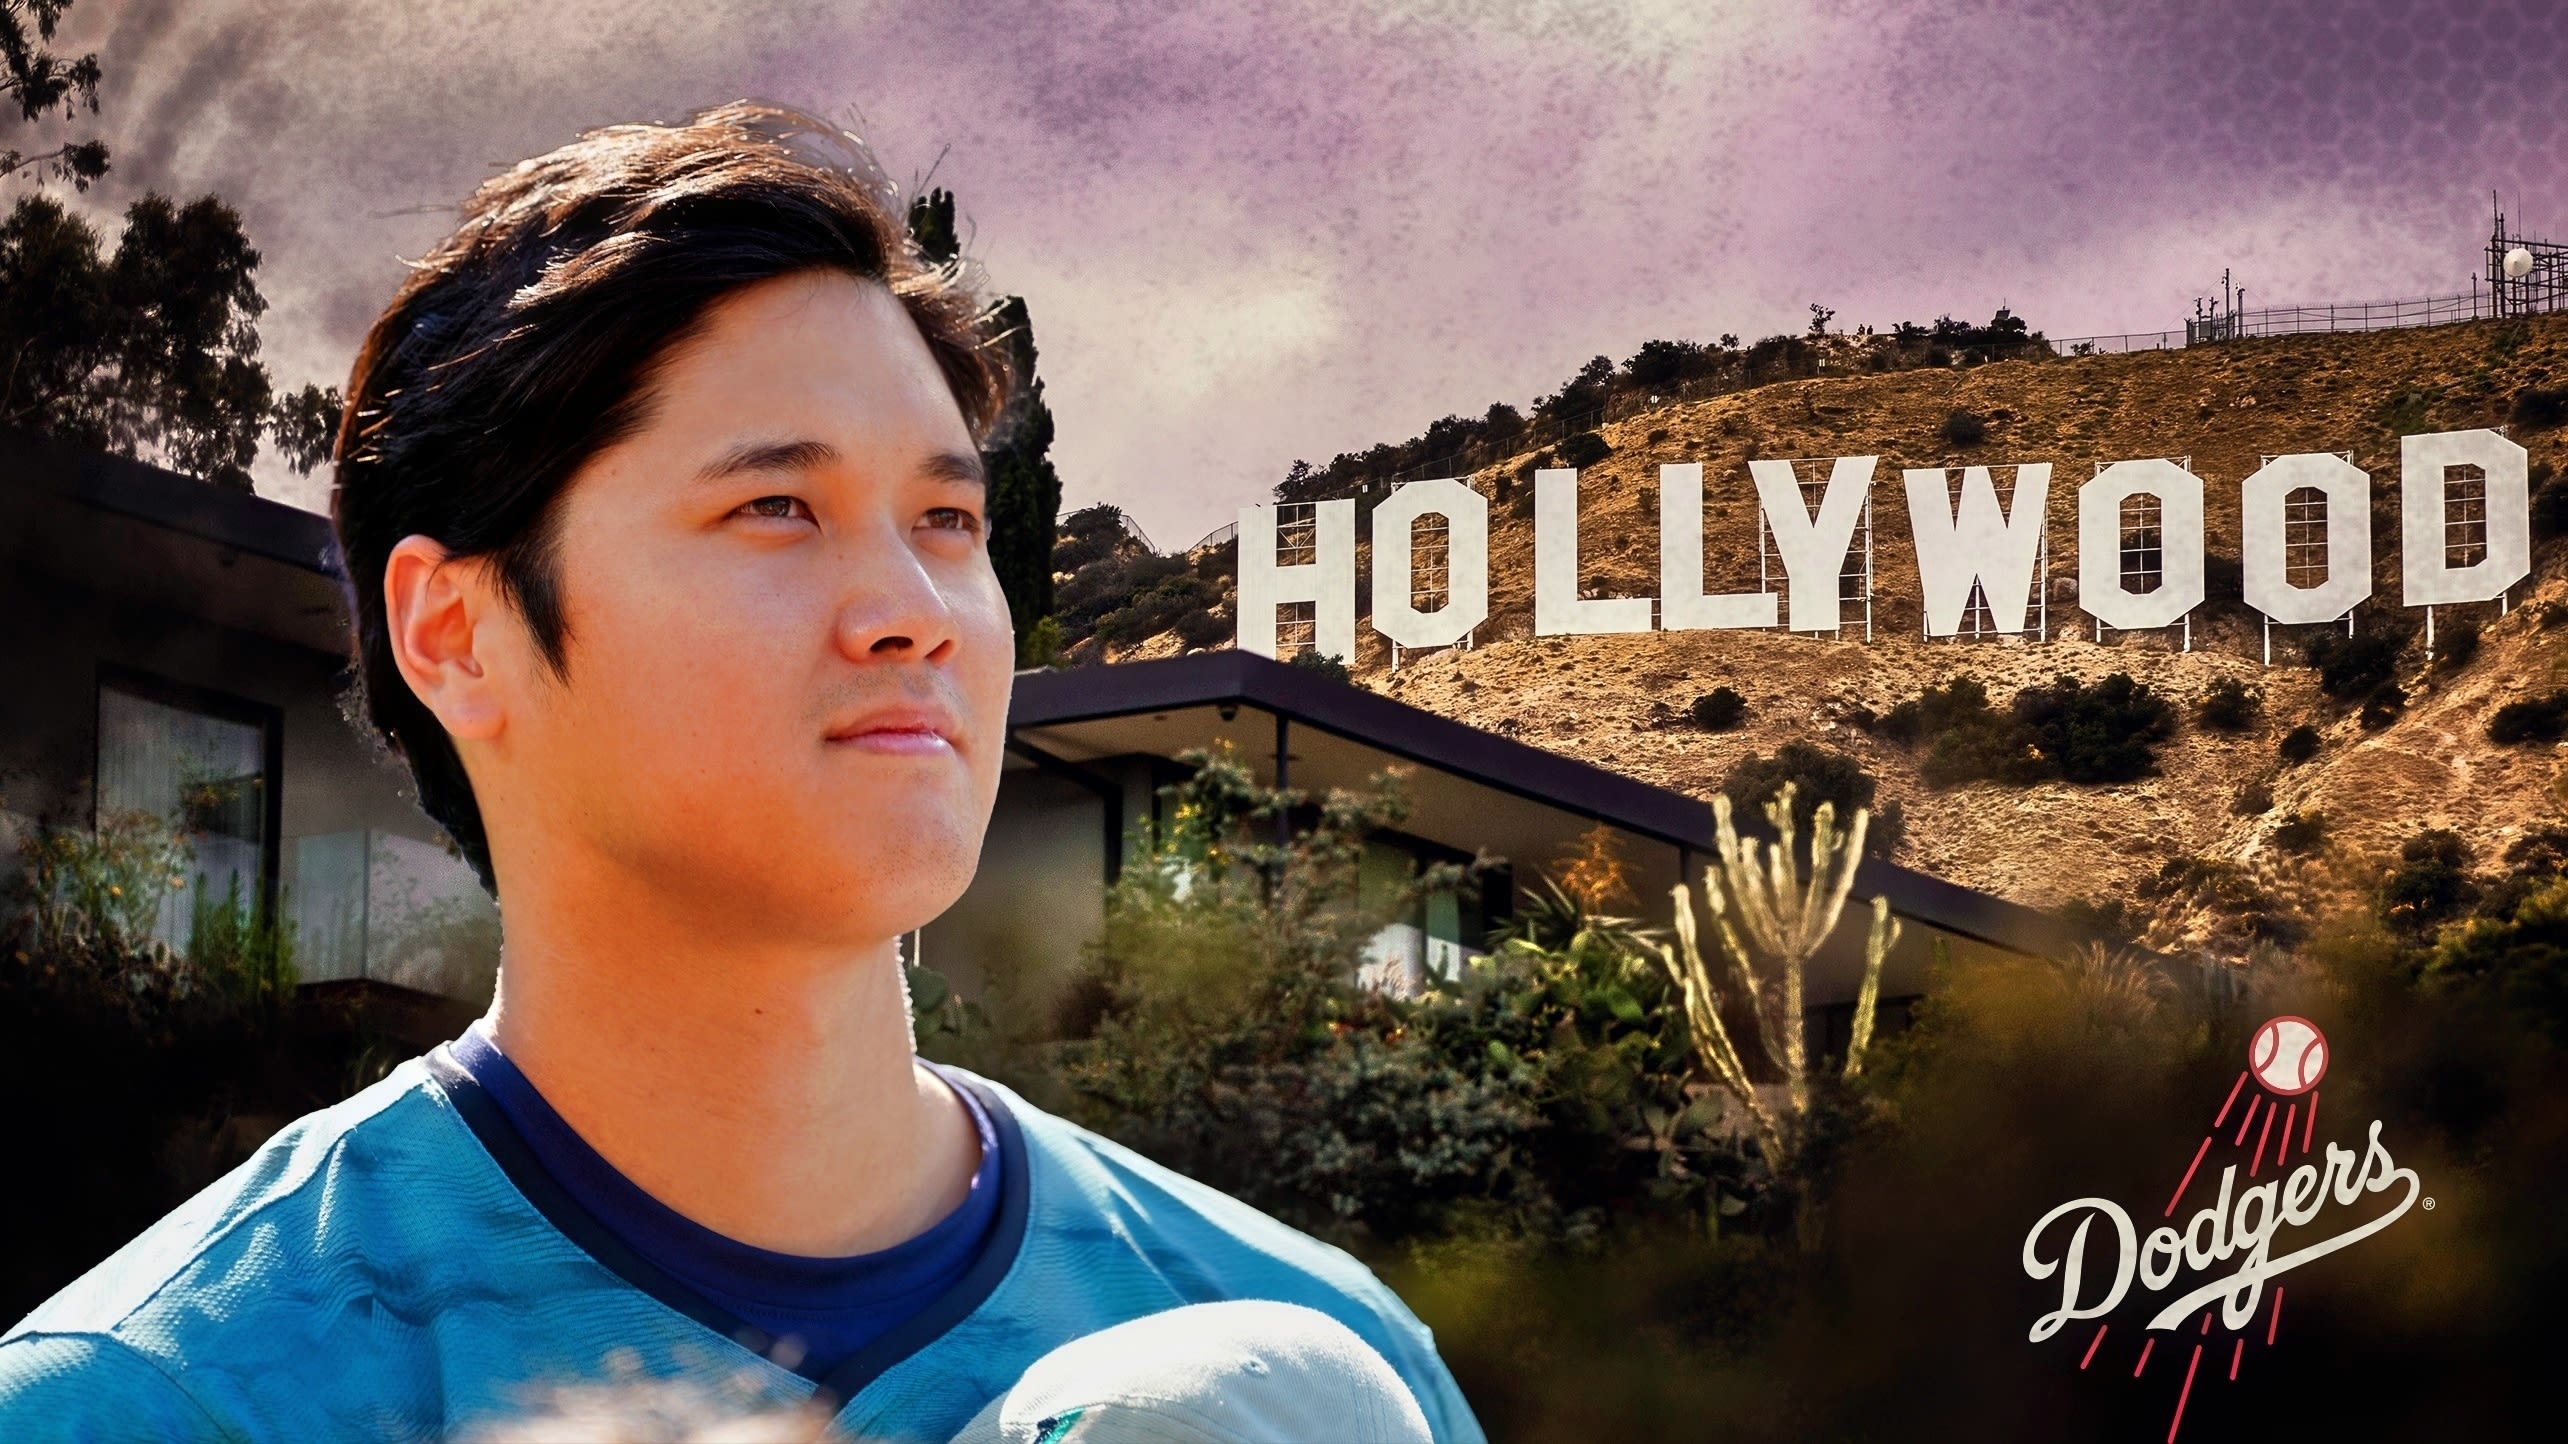 Shohei Ohtani against the backdrop of the Hollywood sign